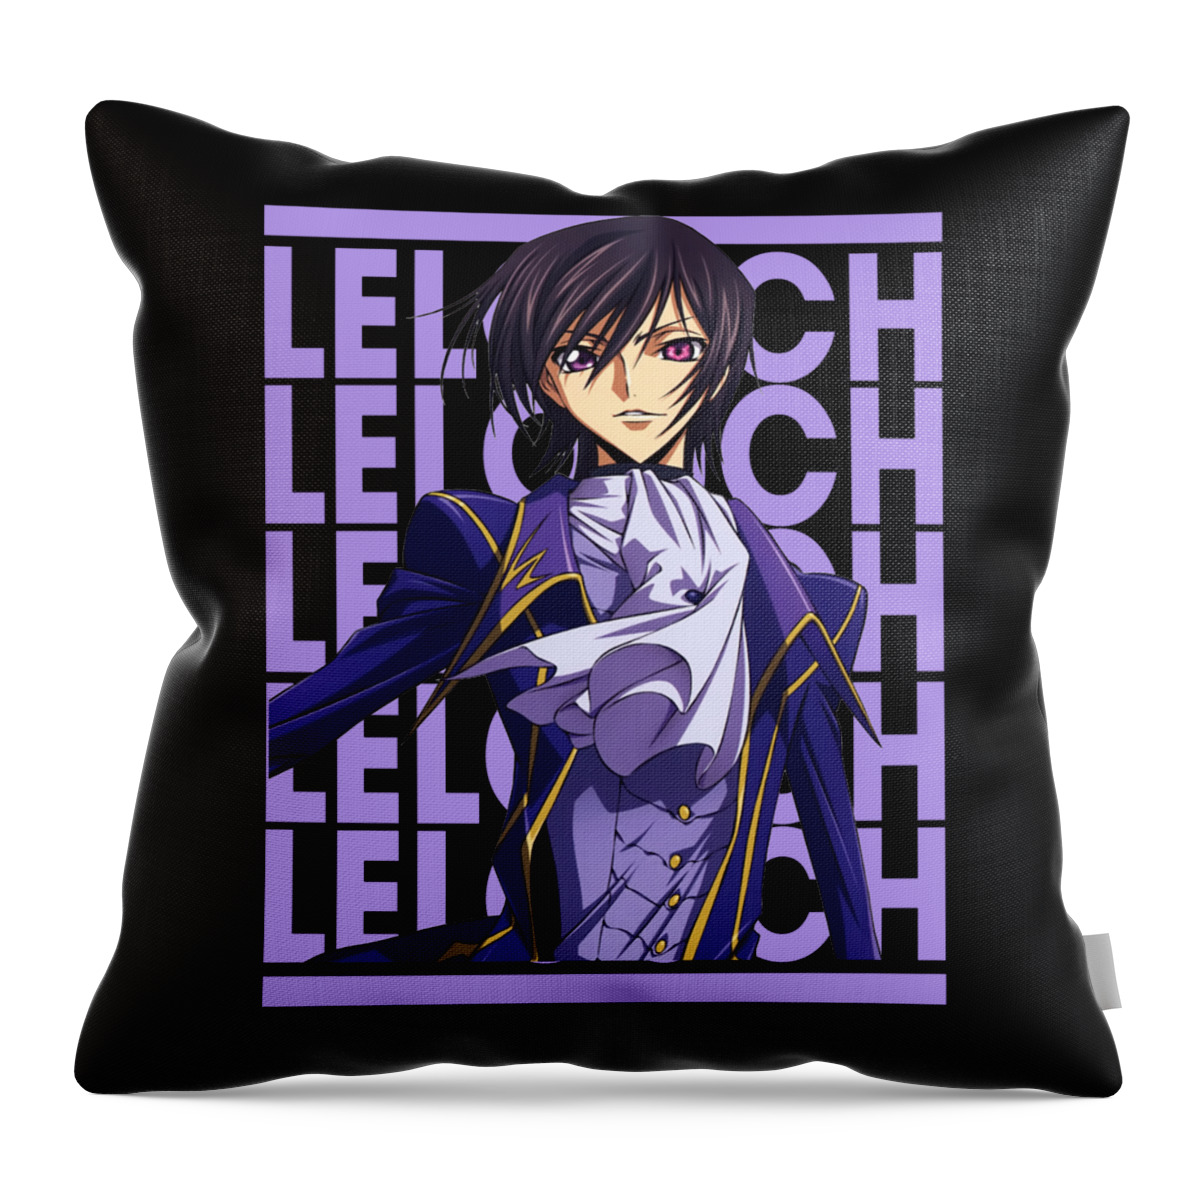 Code Geass Lelouch And C.C Photo Drawing by Anime Art - Pixels